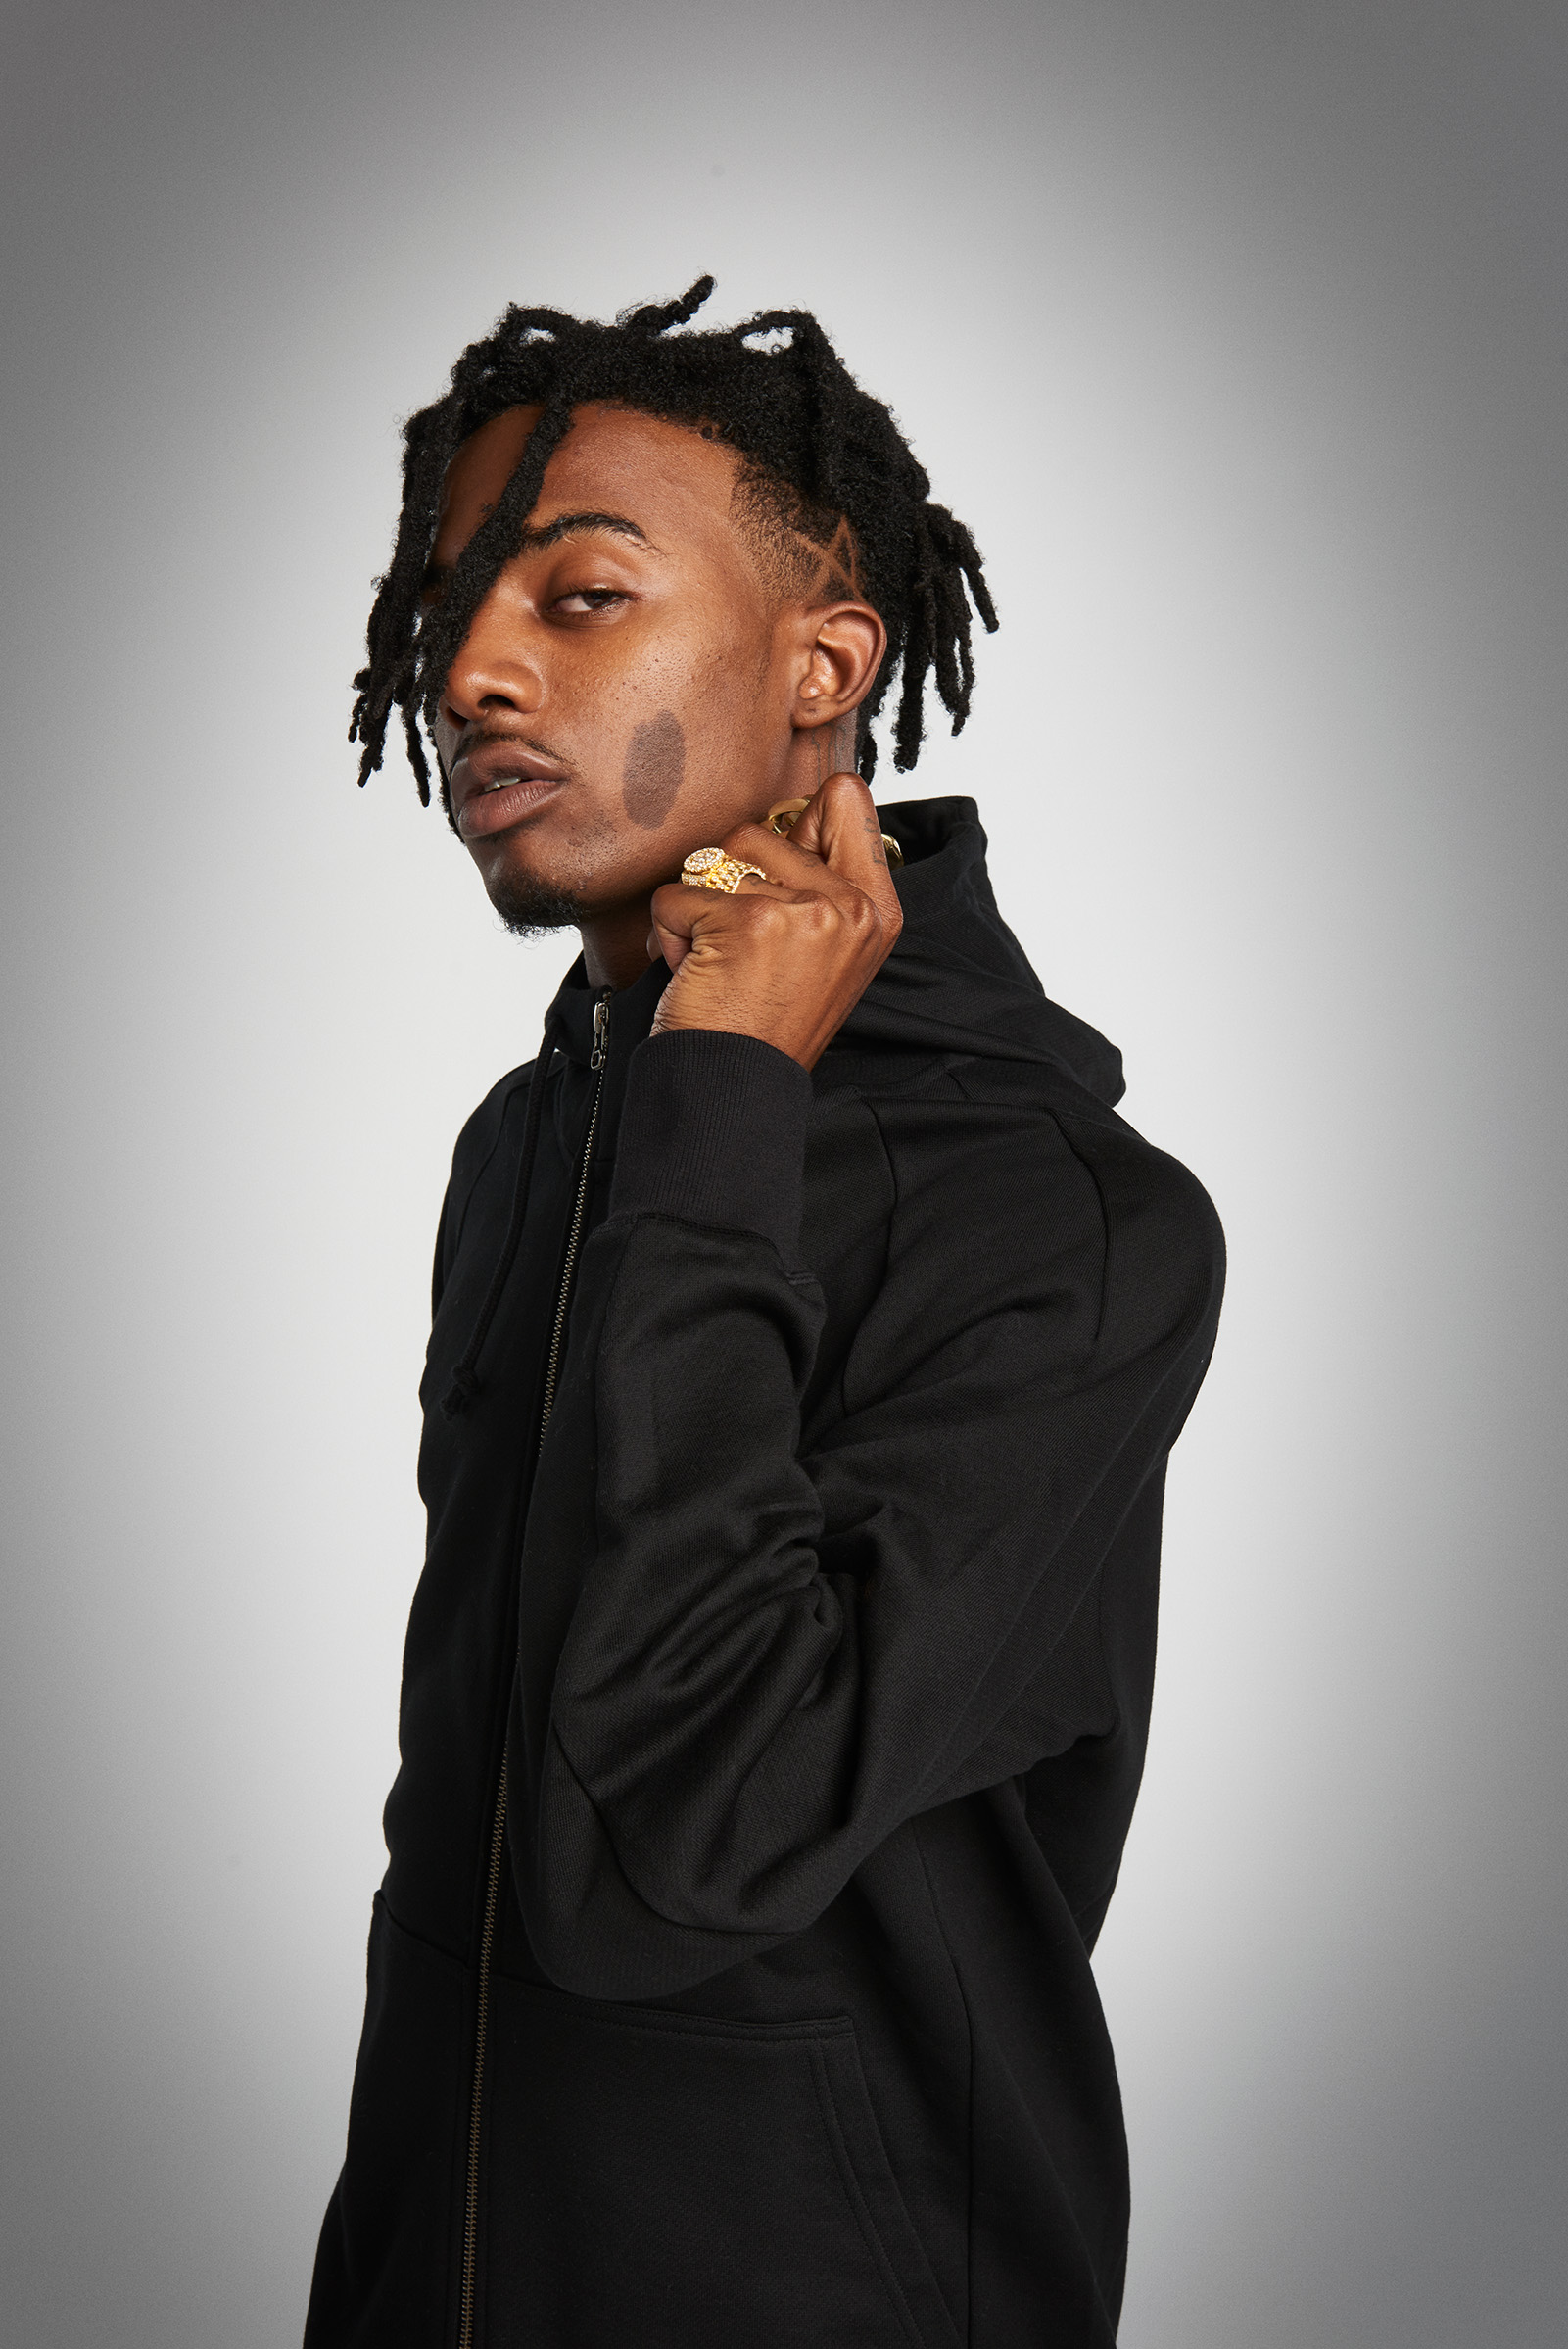 Playboi Carti What does it mean to be original? 